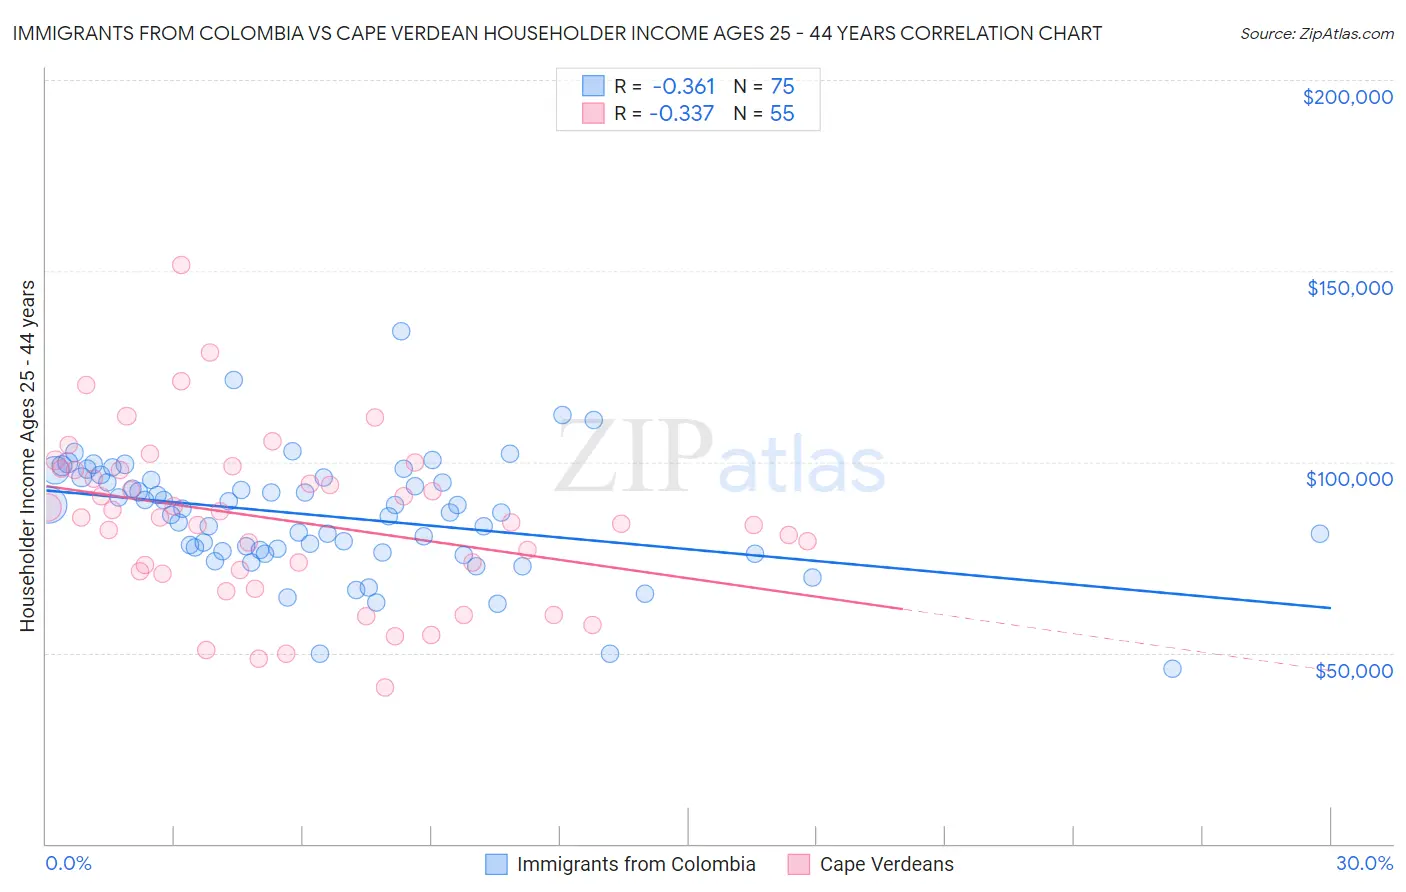 Immigrants from Colombia vs Cape Verdean Householder Income Ages 25 - 44 years